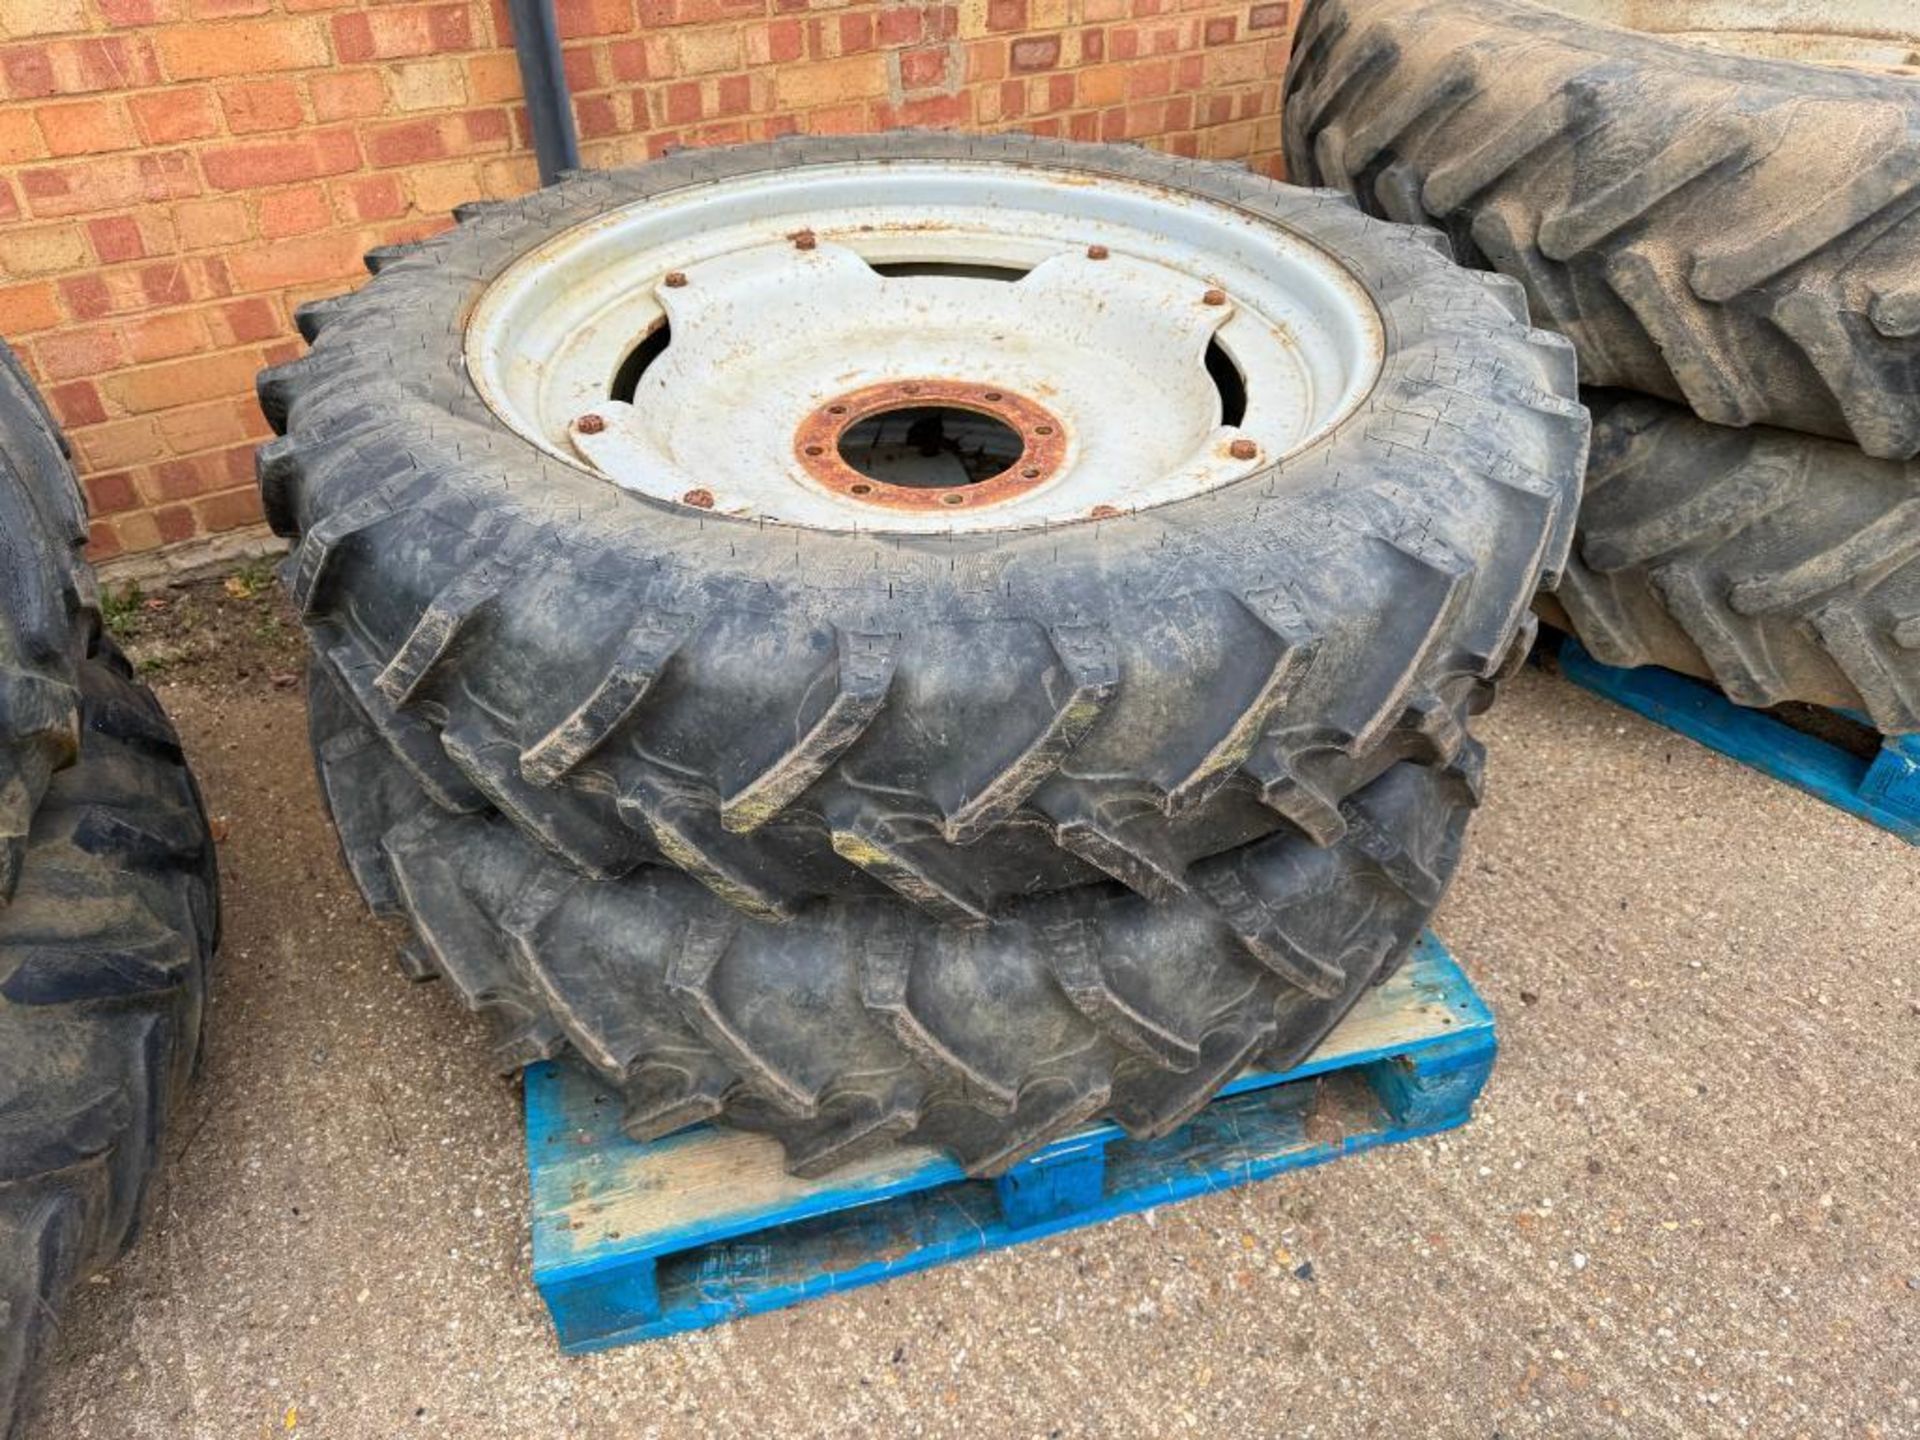 Set Alliance 13.6R48 rear and BKT 11.2R36 front row crop wheels and tyres on Massey Ferguson centres - Image 6 of 8